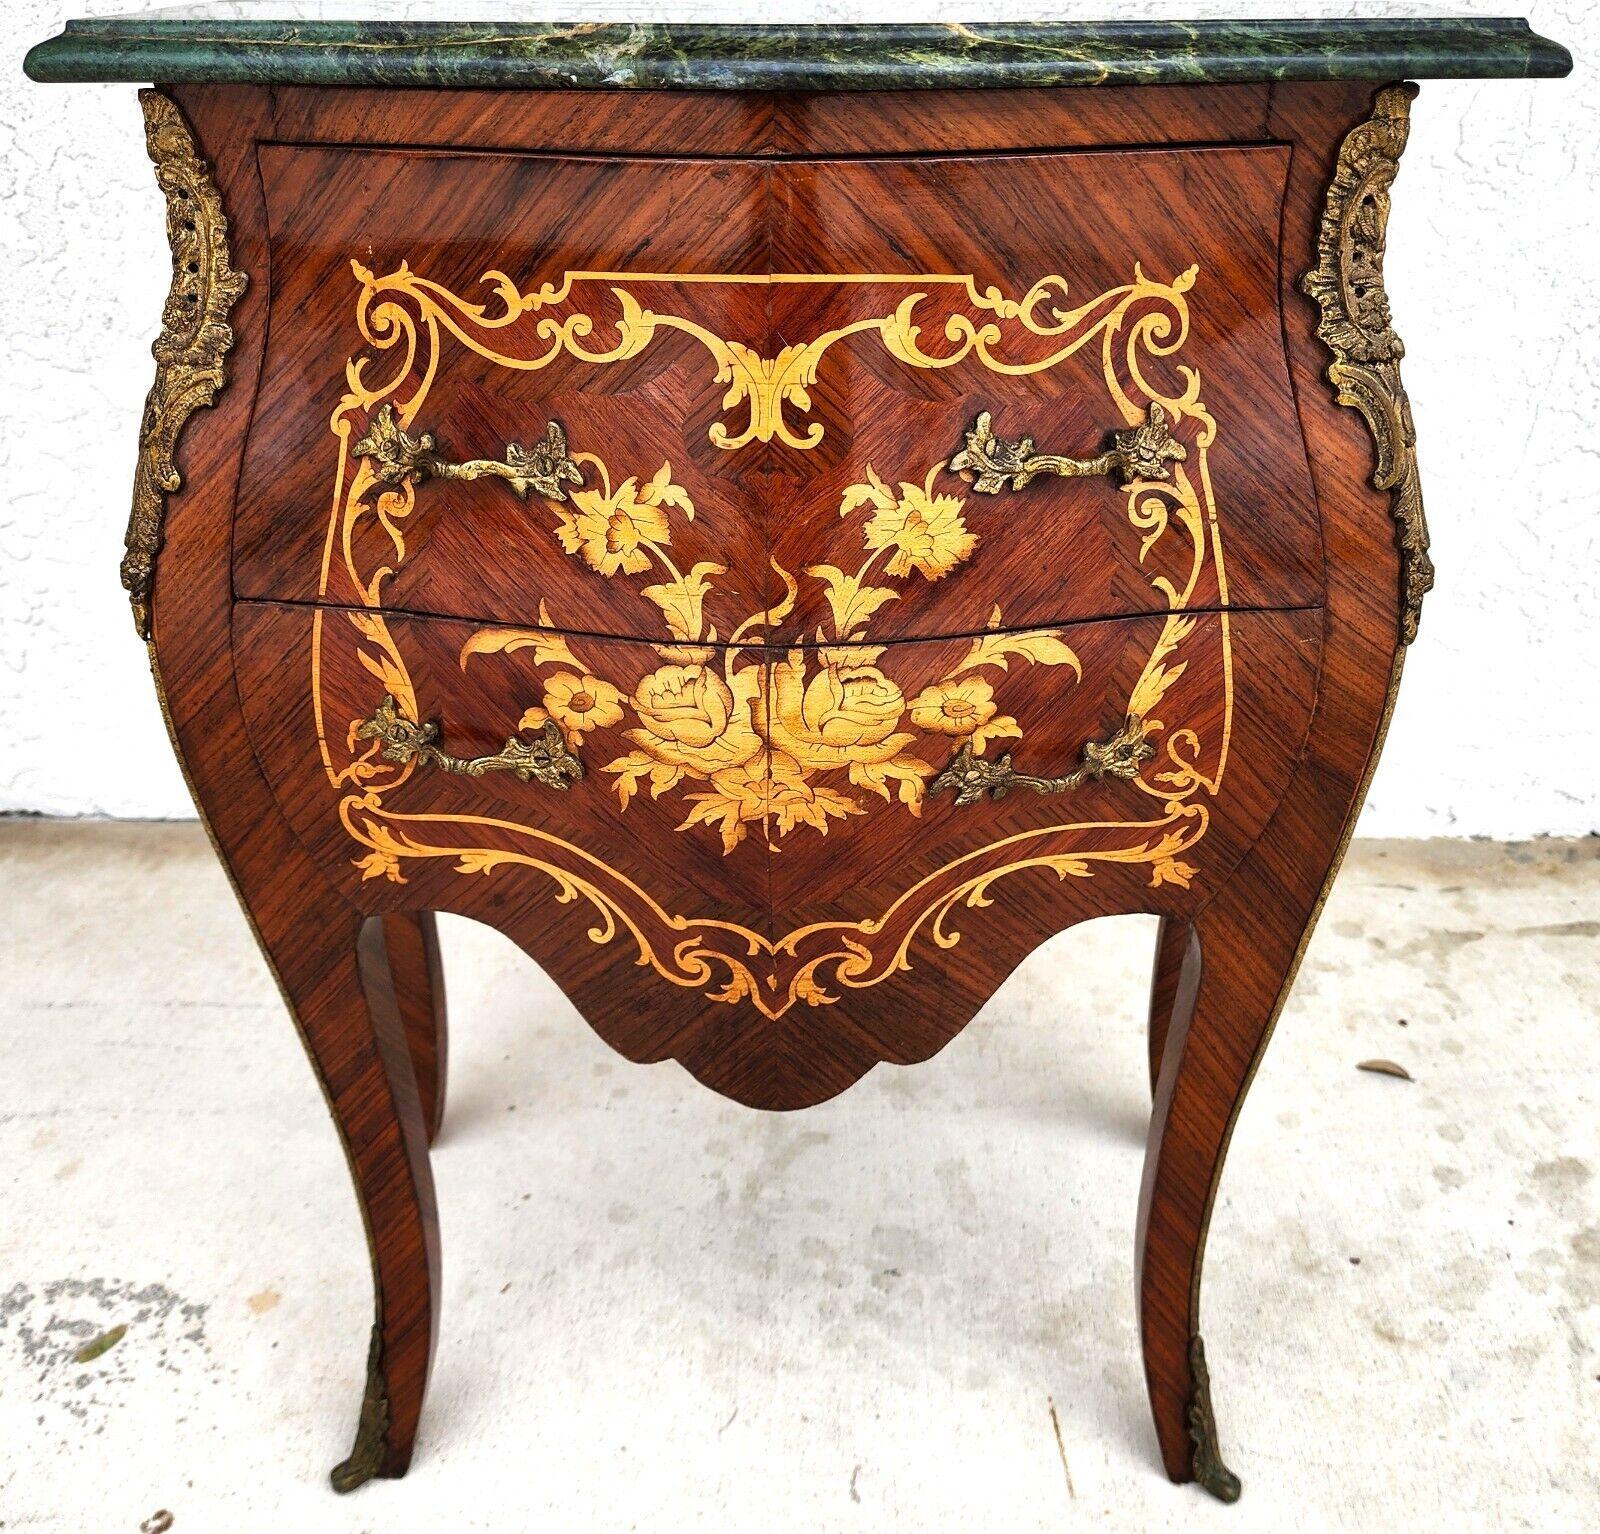 For FULL item description click on CONTINUE READING at the bottom of this page.

Offering One Of Our Recent Palm Beach Estate Fine Furniture Acquisitions Of A
Vintage Louis XV Style Bombay Chest Table with Bronze Ormolu Mounts and Drawer Pulls, and